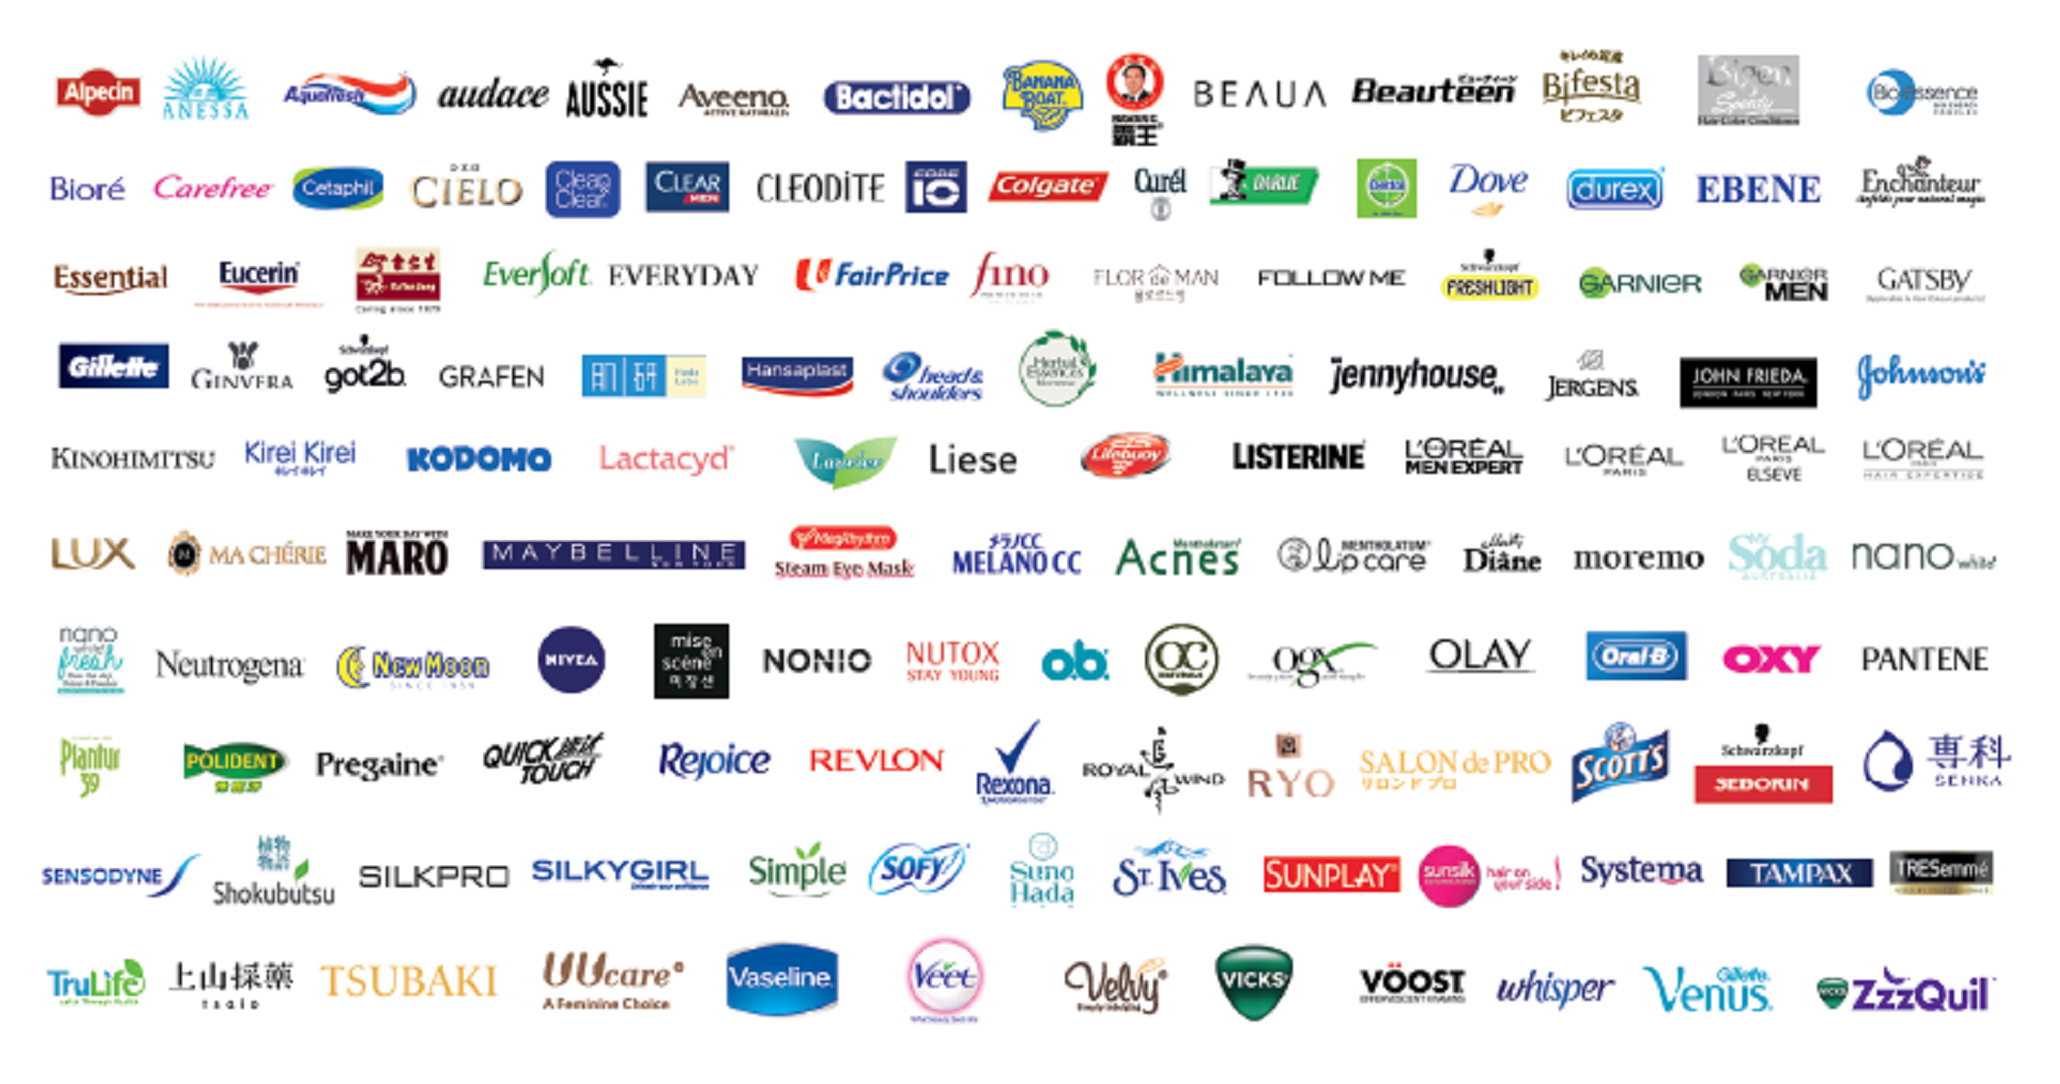 participating brands